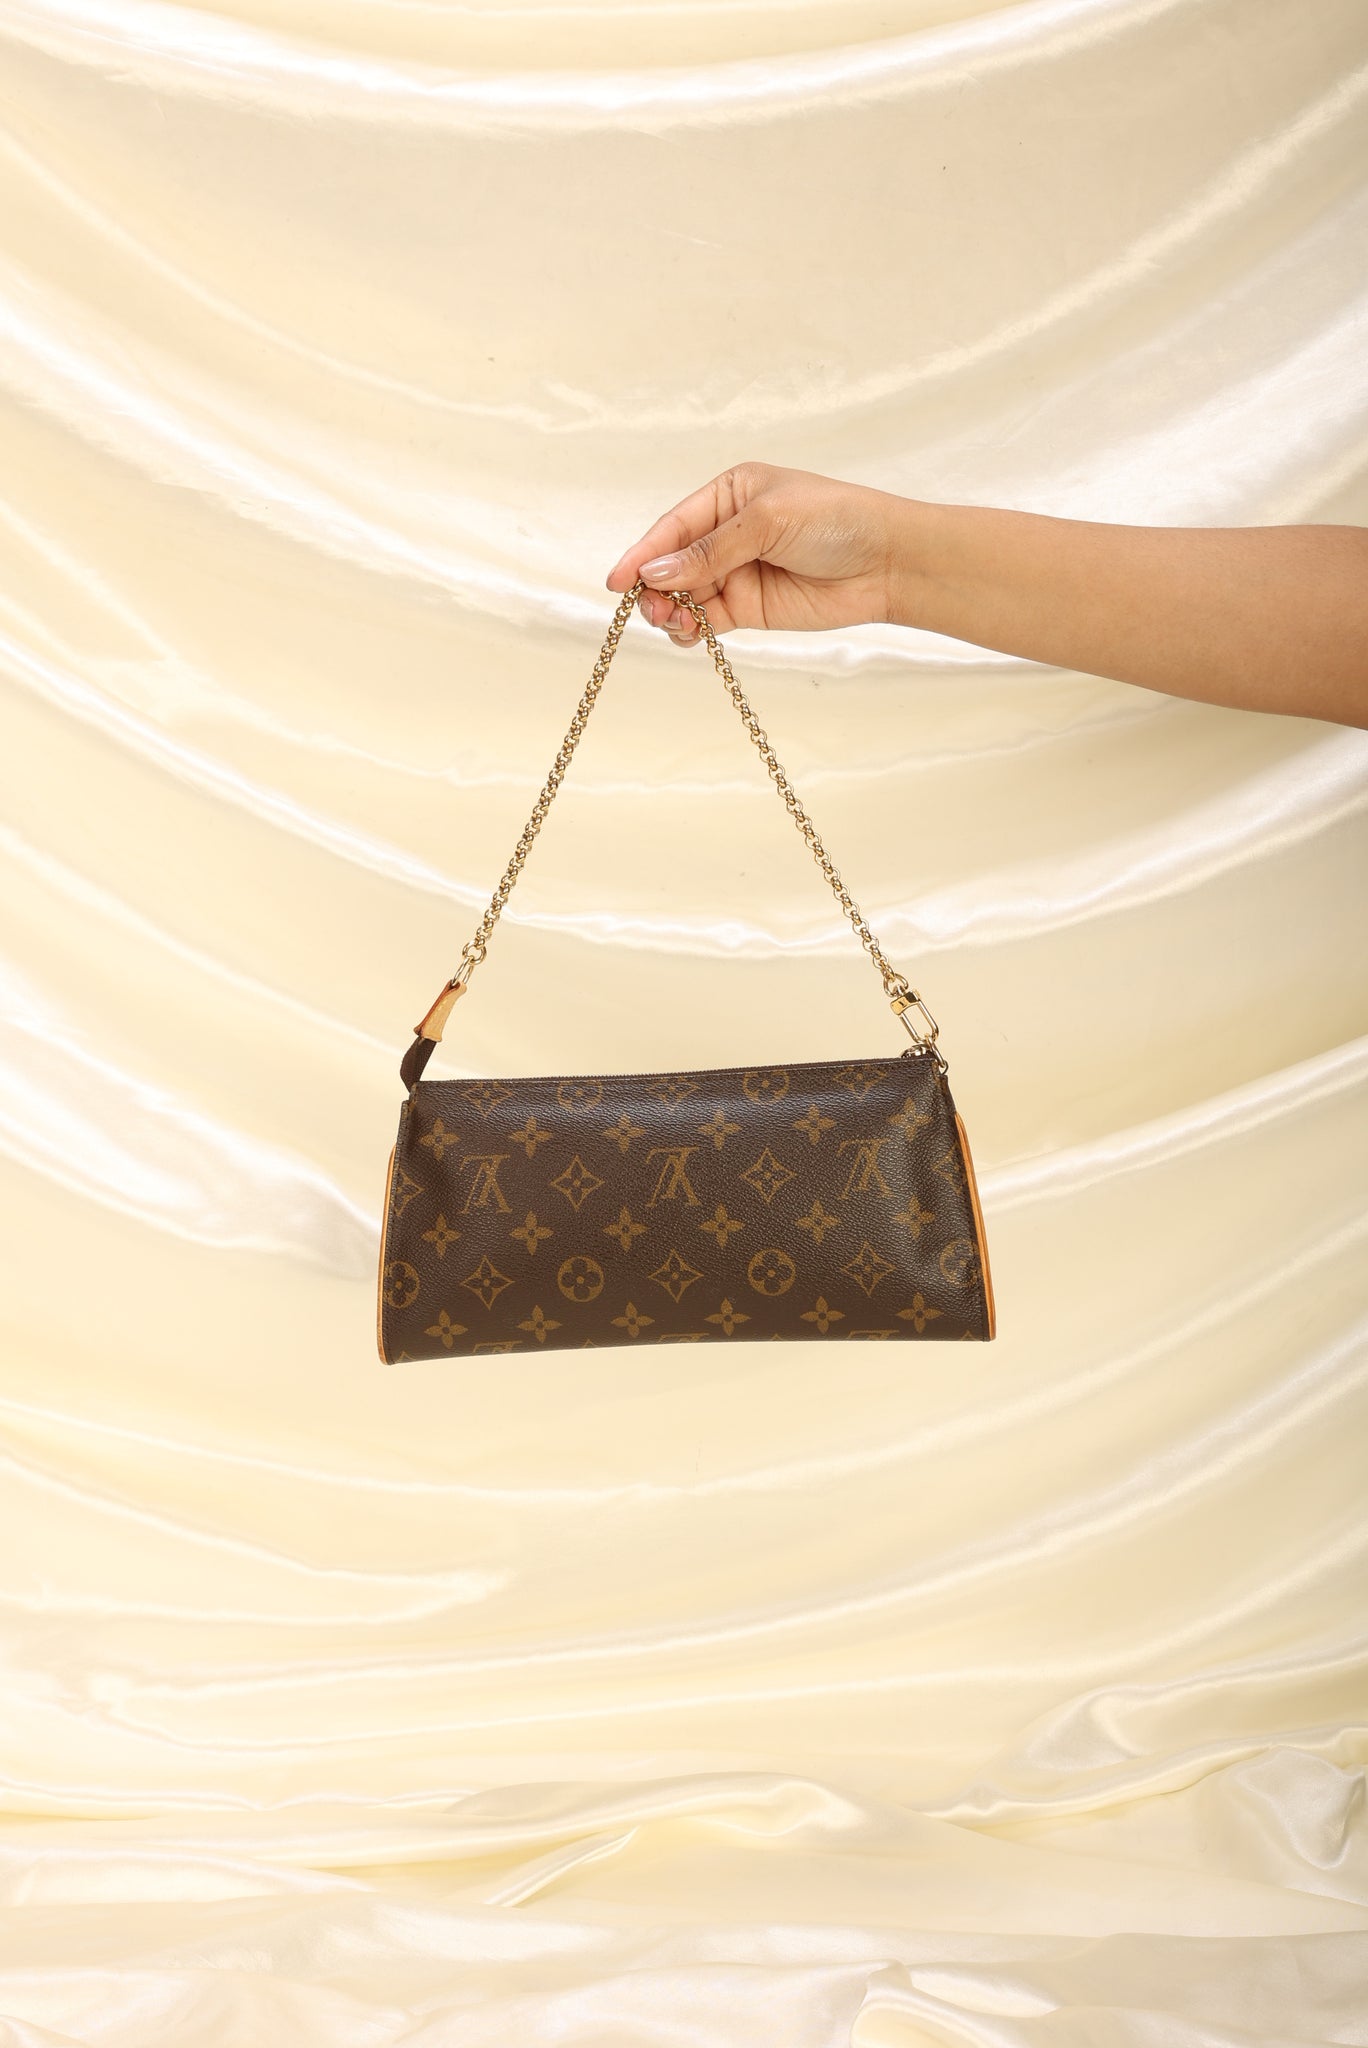 LOUIS VUITTON - PALLACE CHAIN Bag Review and What Fits